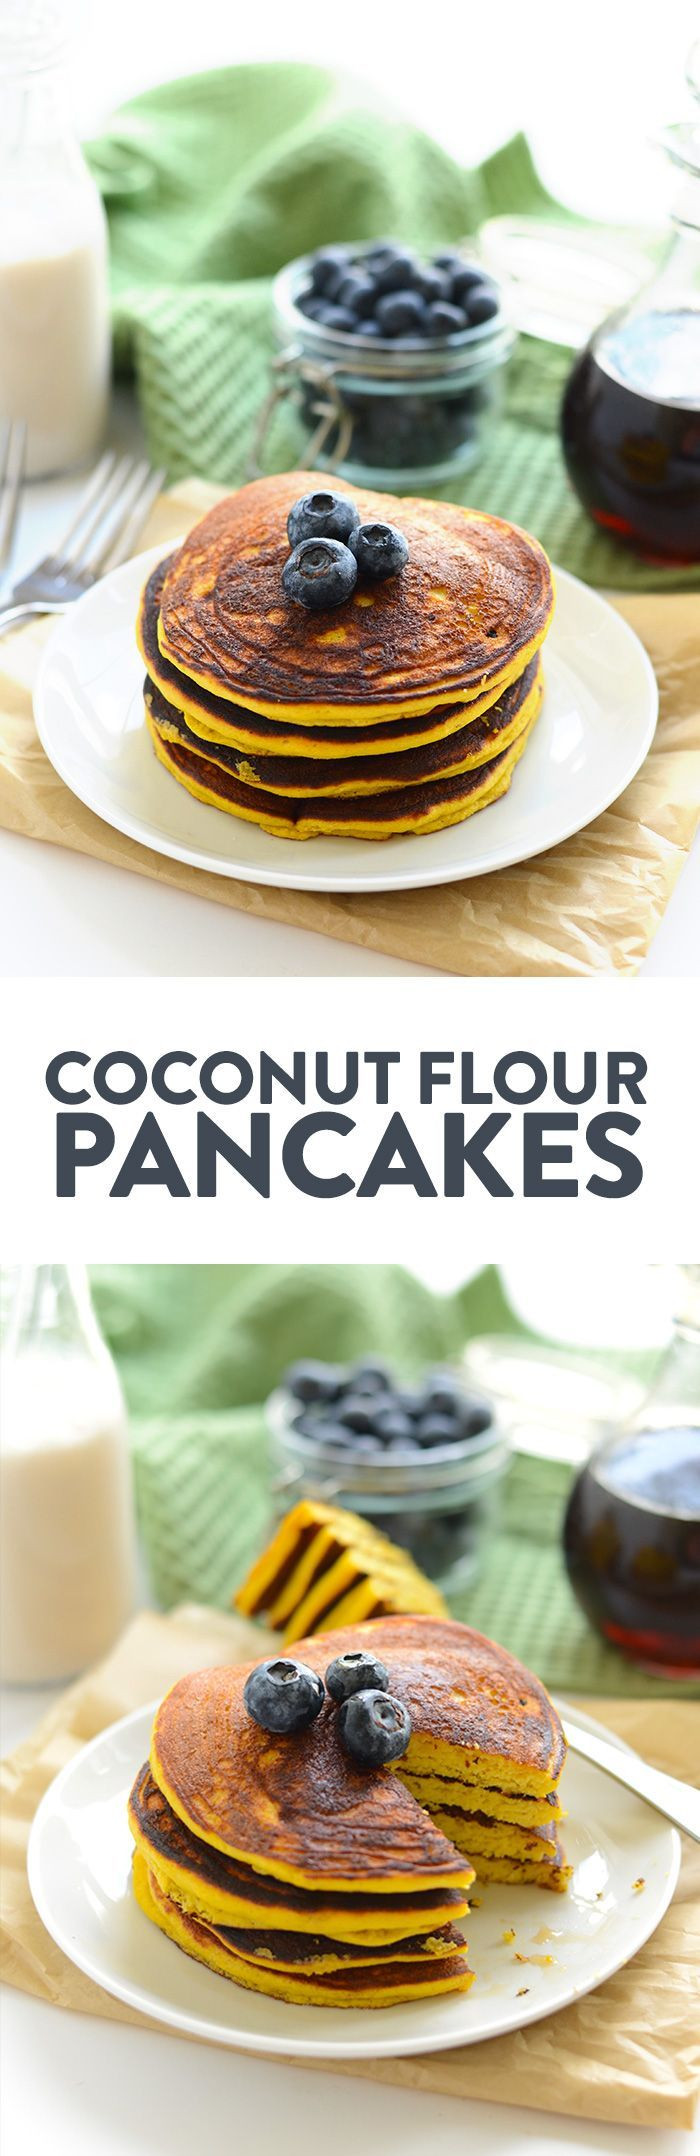 Paleohacks Coconut Pancakes
 These Paleo Coconut Flour Pancakes are the best you ll